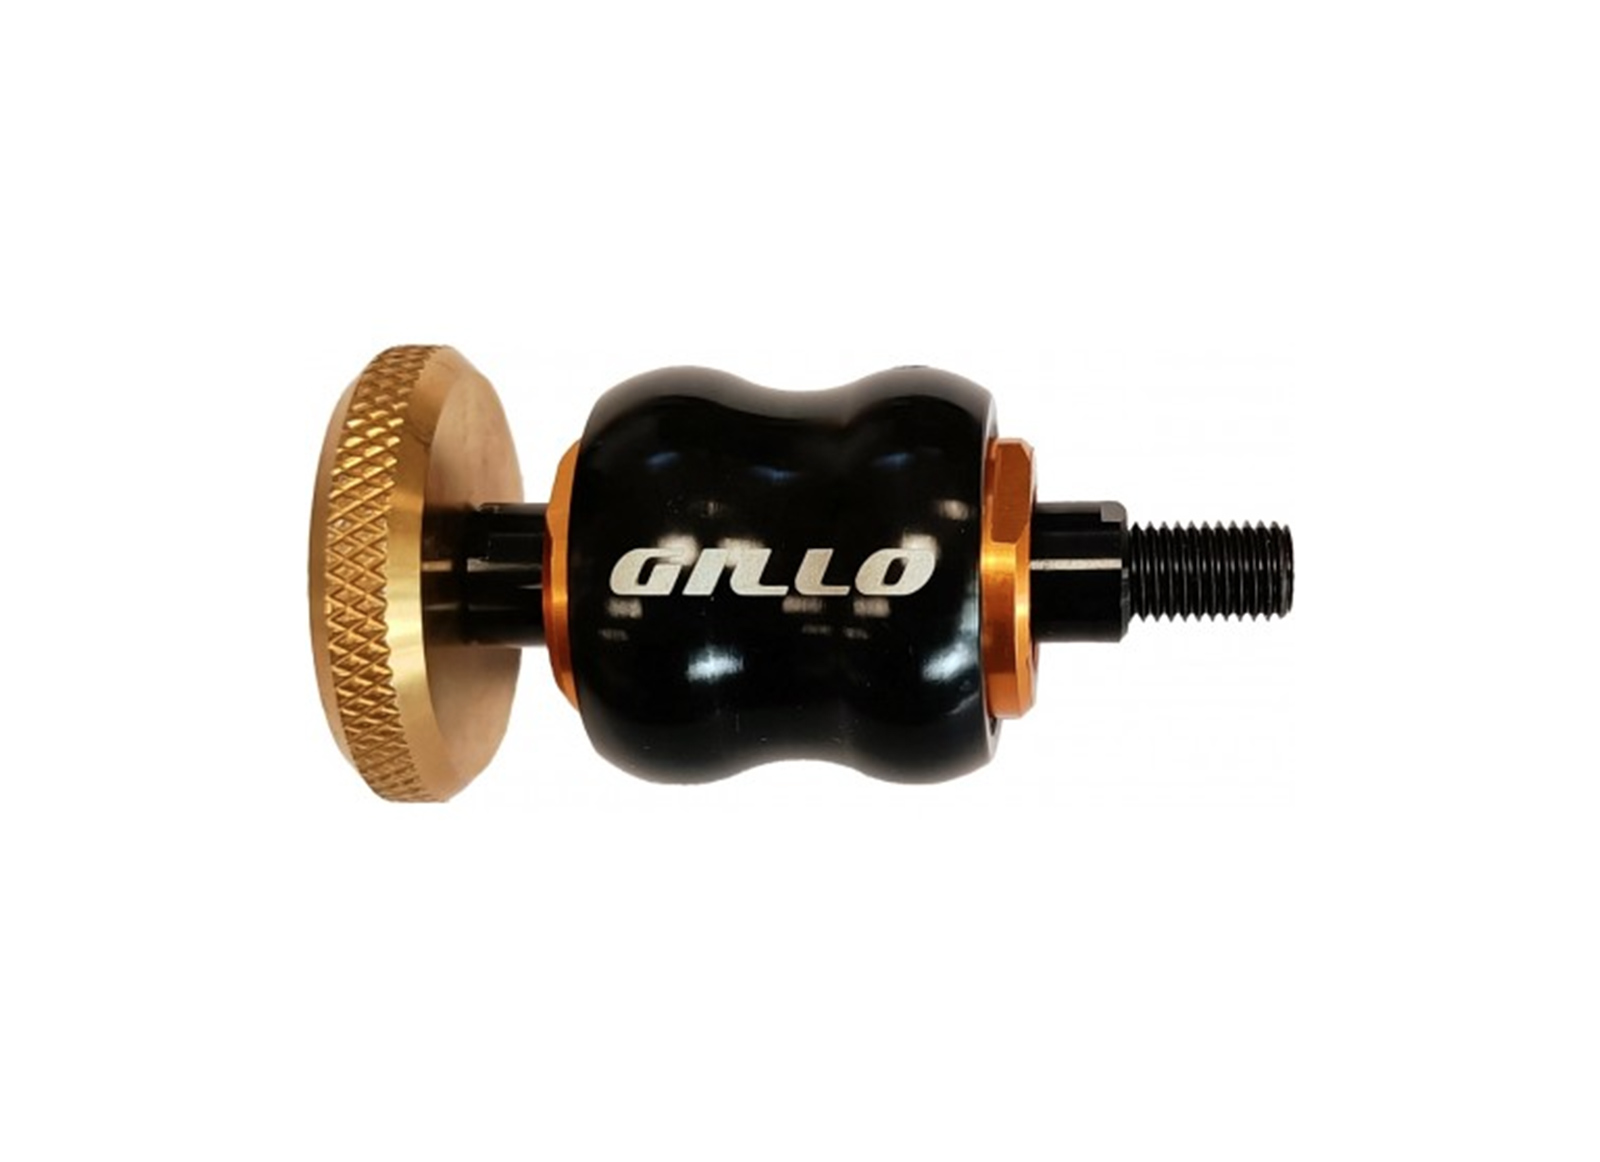 GILLO ADJUSTABLE DAMPER FOR ADJUSTABLE ANTI-VIBRATION RISER WITH WEIGHT